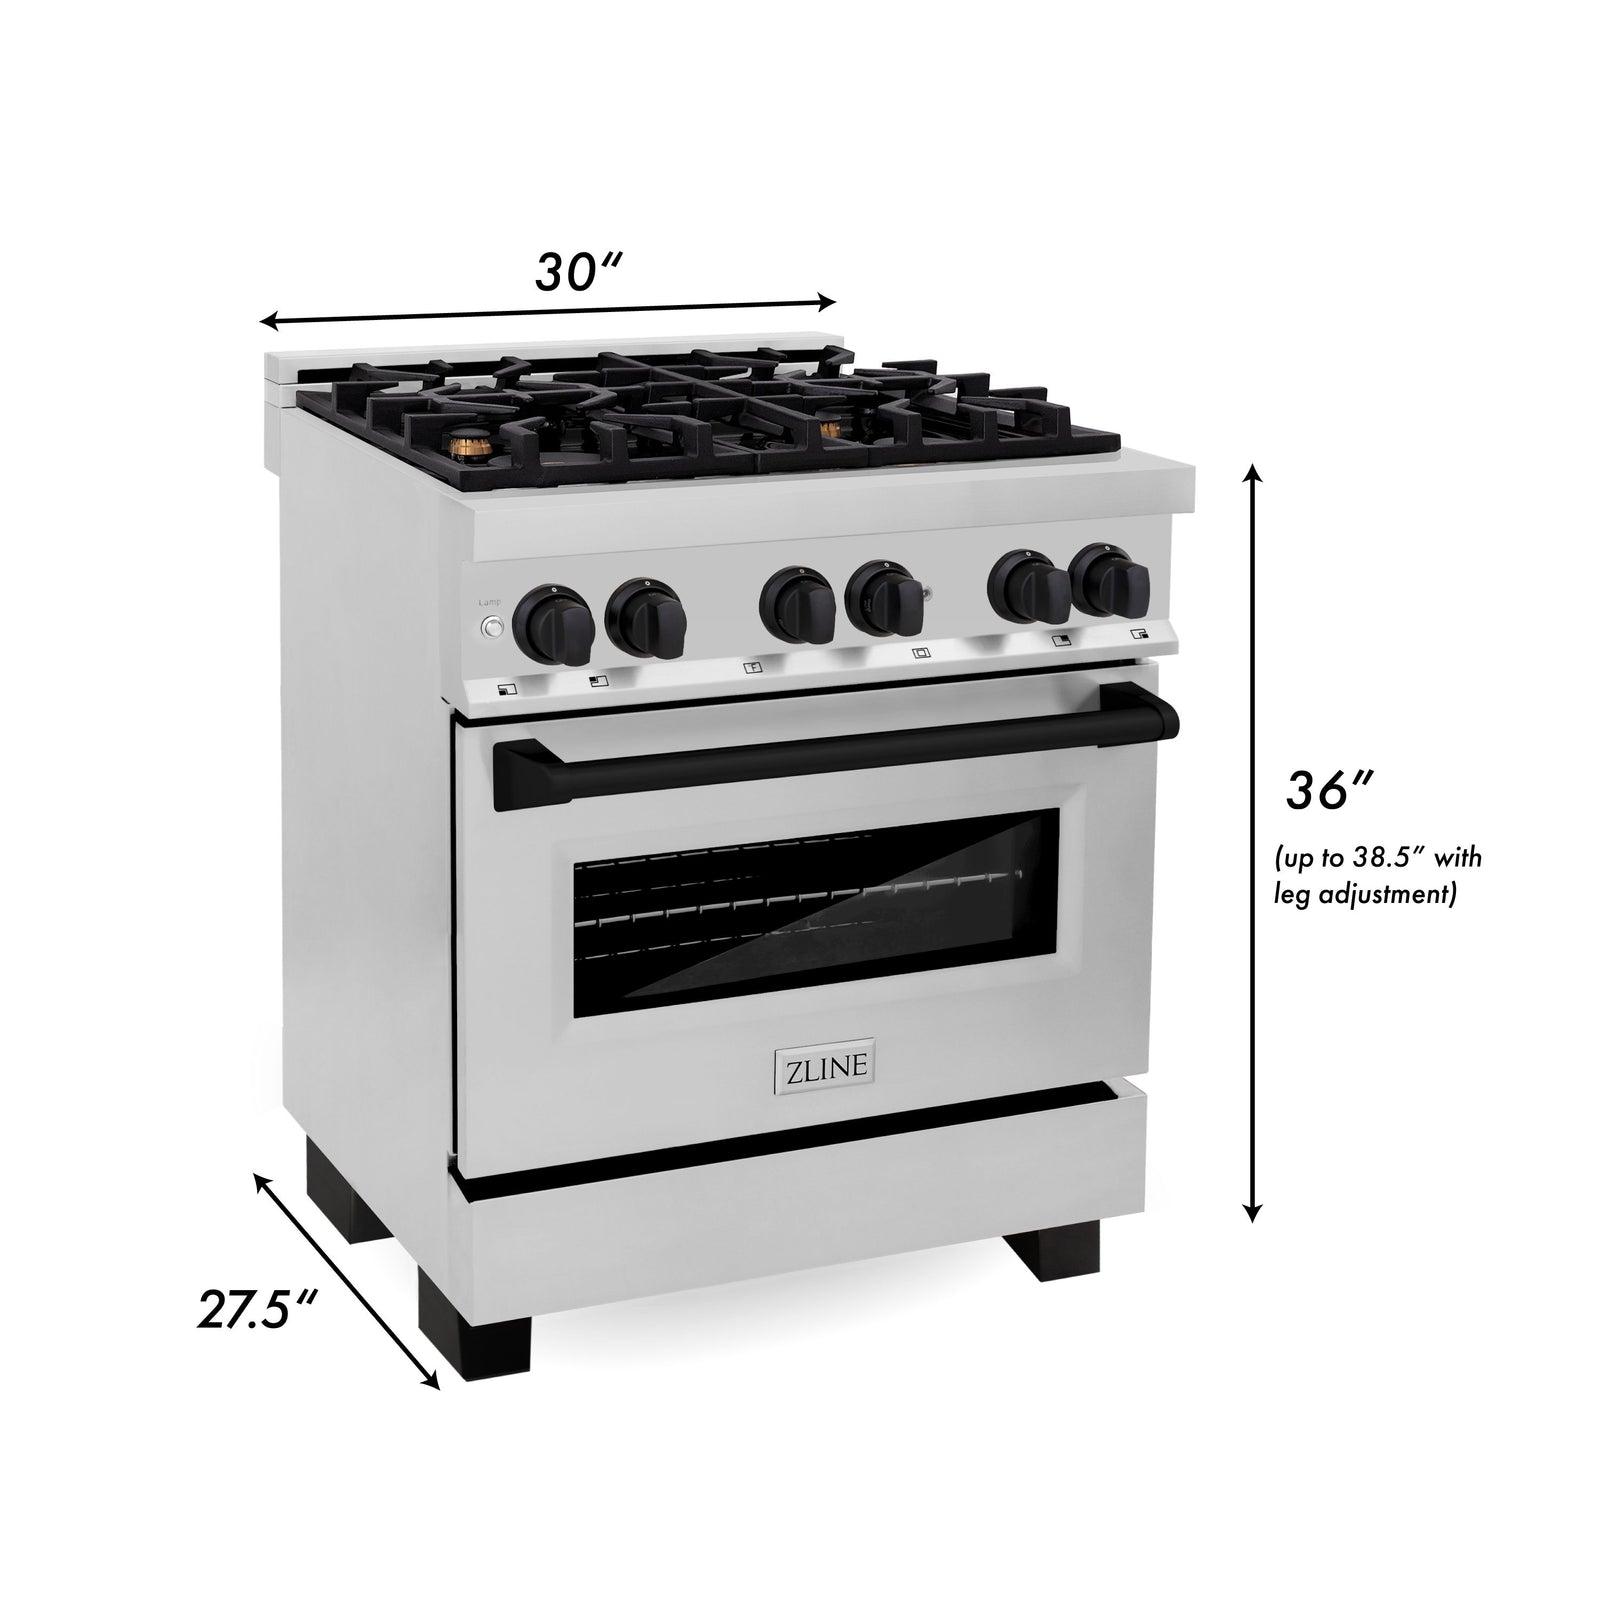 ZLINE Autograph Edition 30 in. 4.0 cu. ft. Dual Fuel Range with Gas Stove and Electric Oven in Stainless Steel with Matte Black Accents, RAZ-30-MB - Smart Kitchen Lab